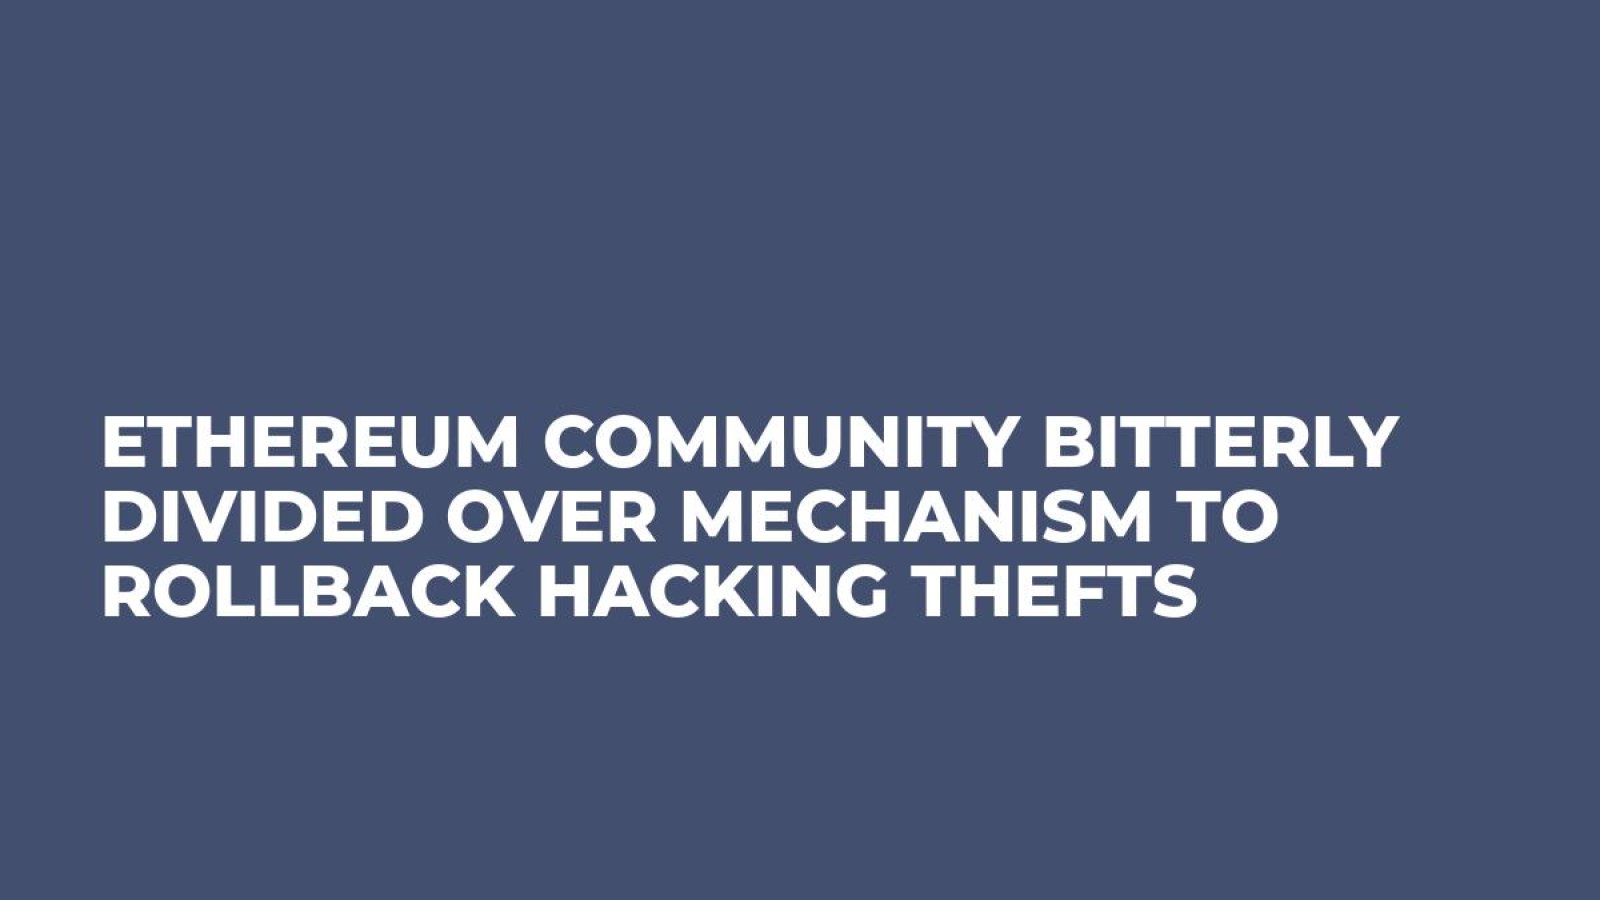 Ethereum Community Bitterly Divided Over Mechanism to Rollback Hacking Thefts